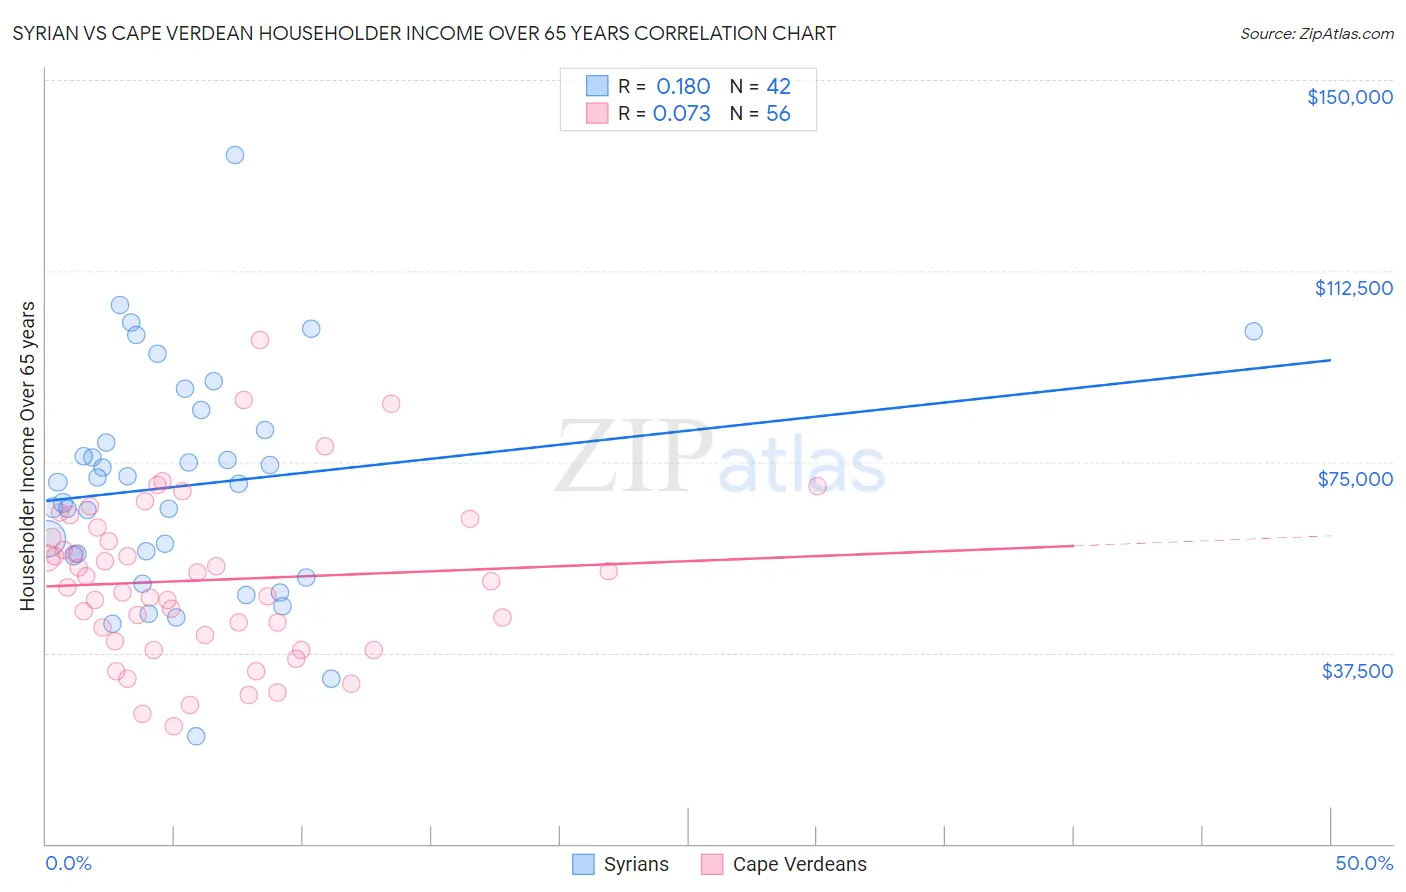 Syrian vs Cape Verdean Householder Income Over 65 years